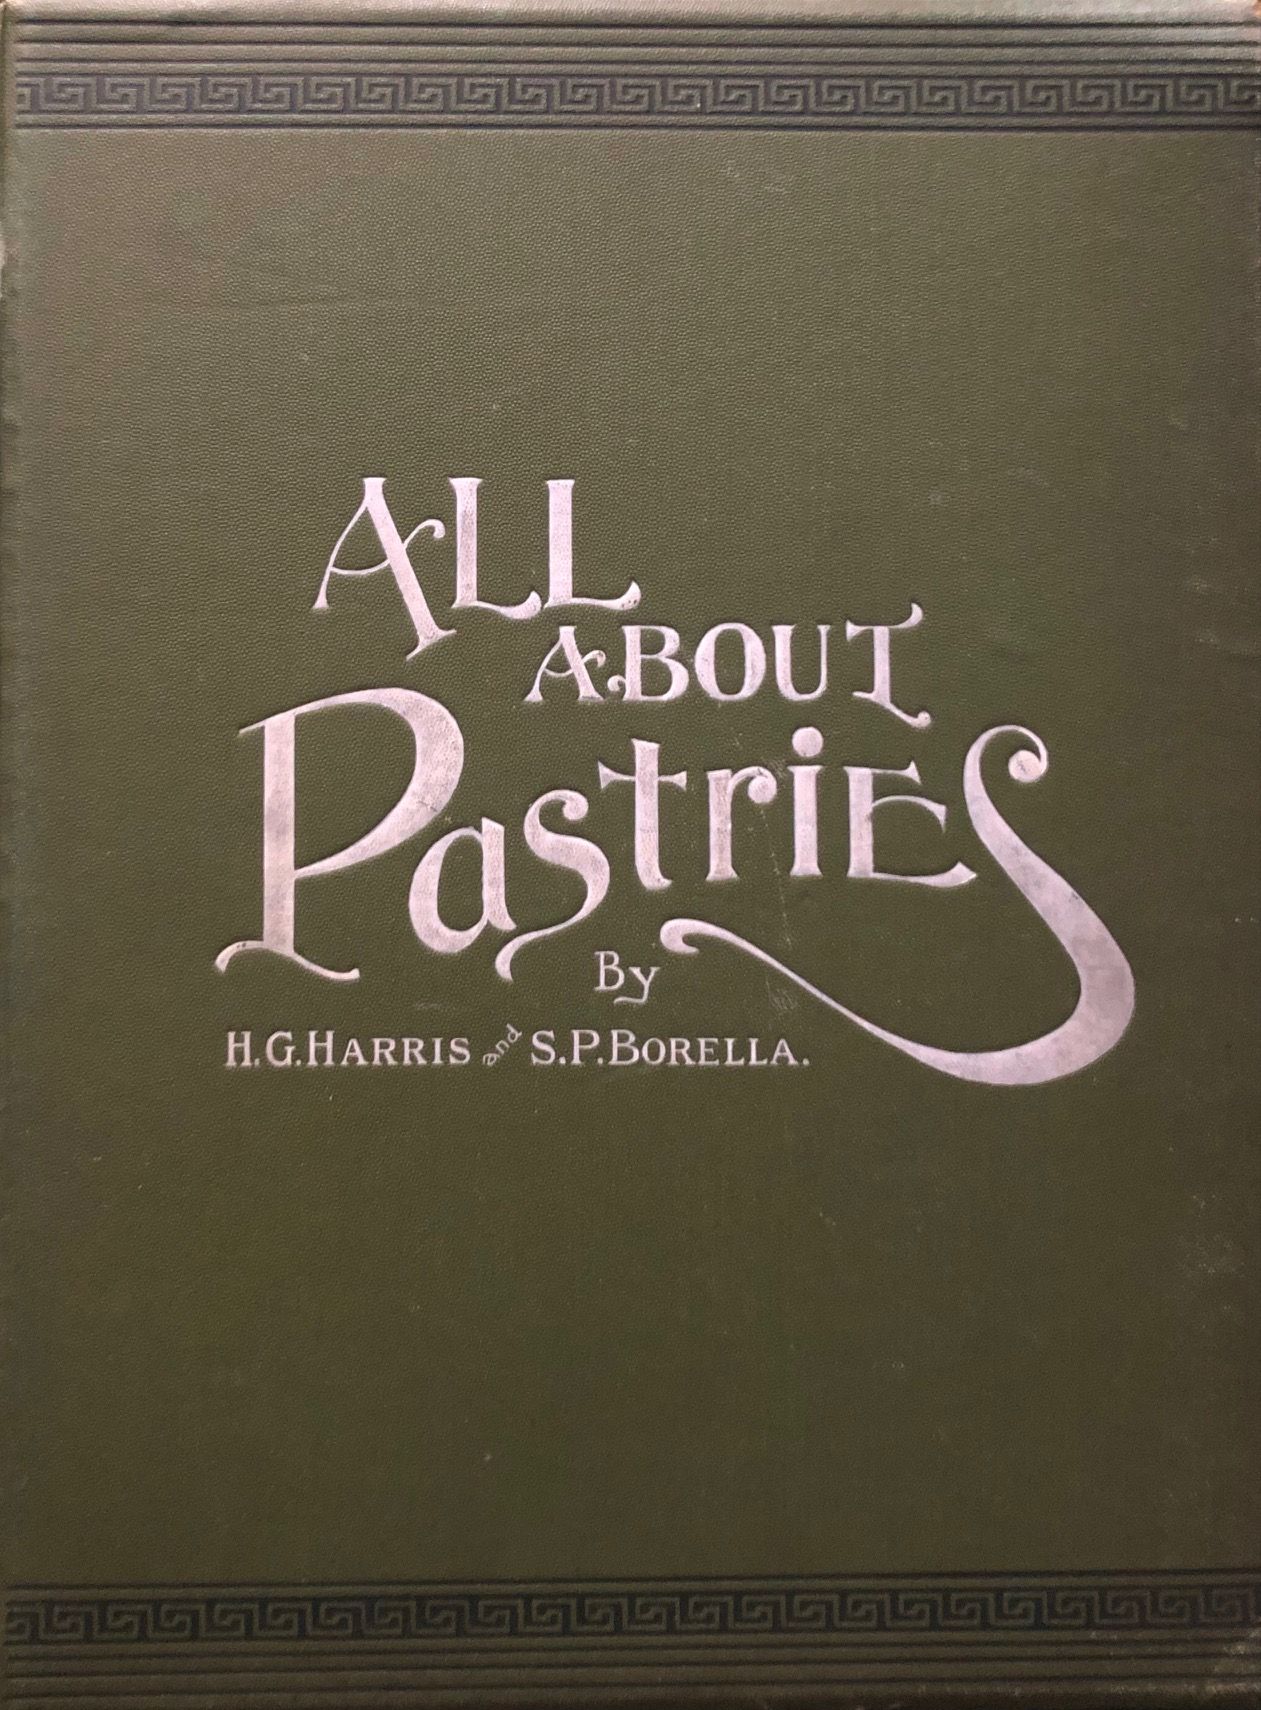 (Confectionery) Harris, H.G. & S.P. Borella. All About Pastries